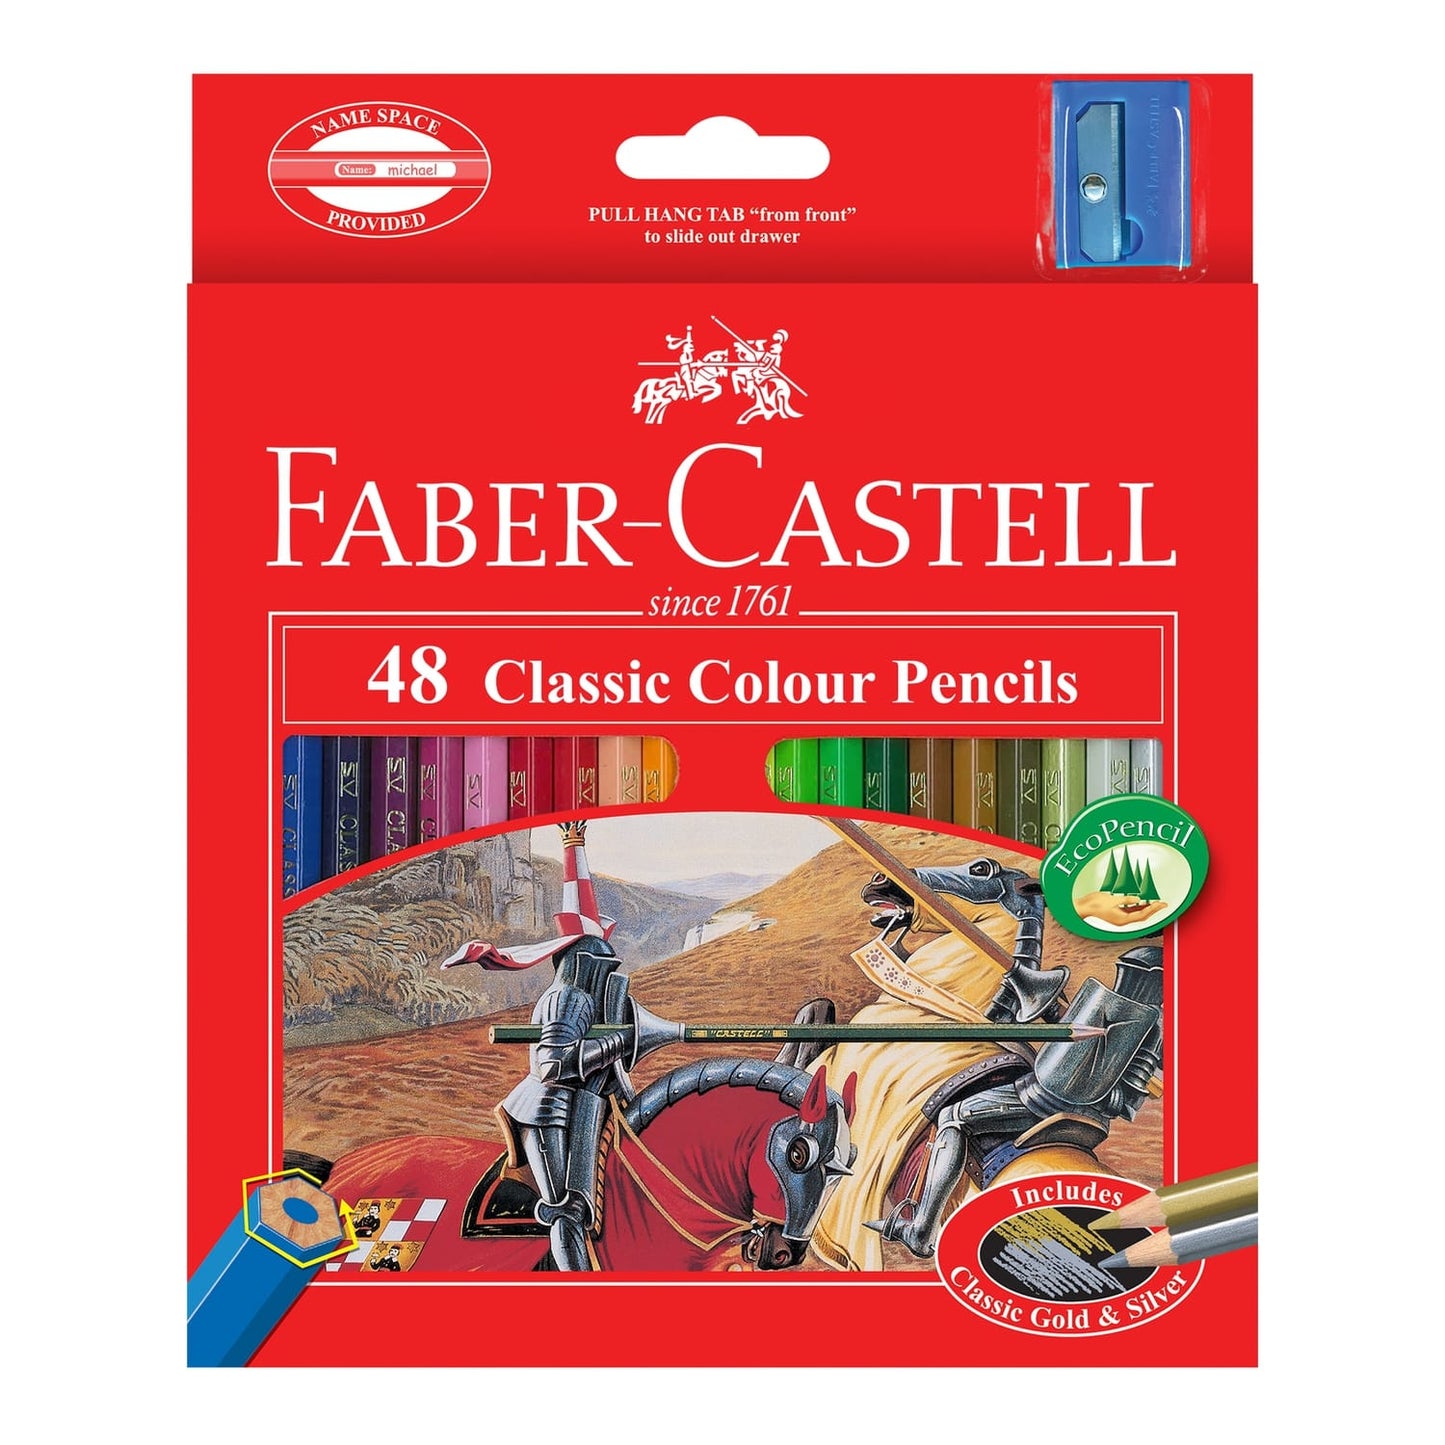 Classic Colour Pencils, Assorted – Pack of 48   Also includes 1 sharpener